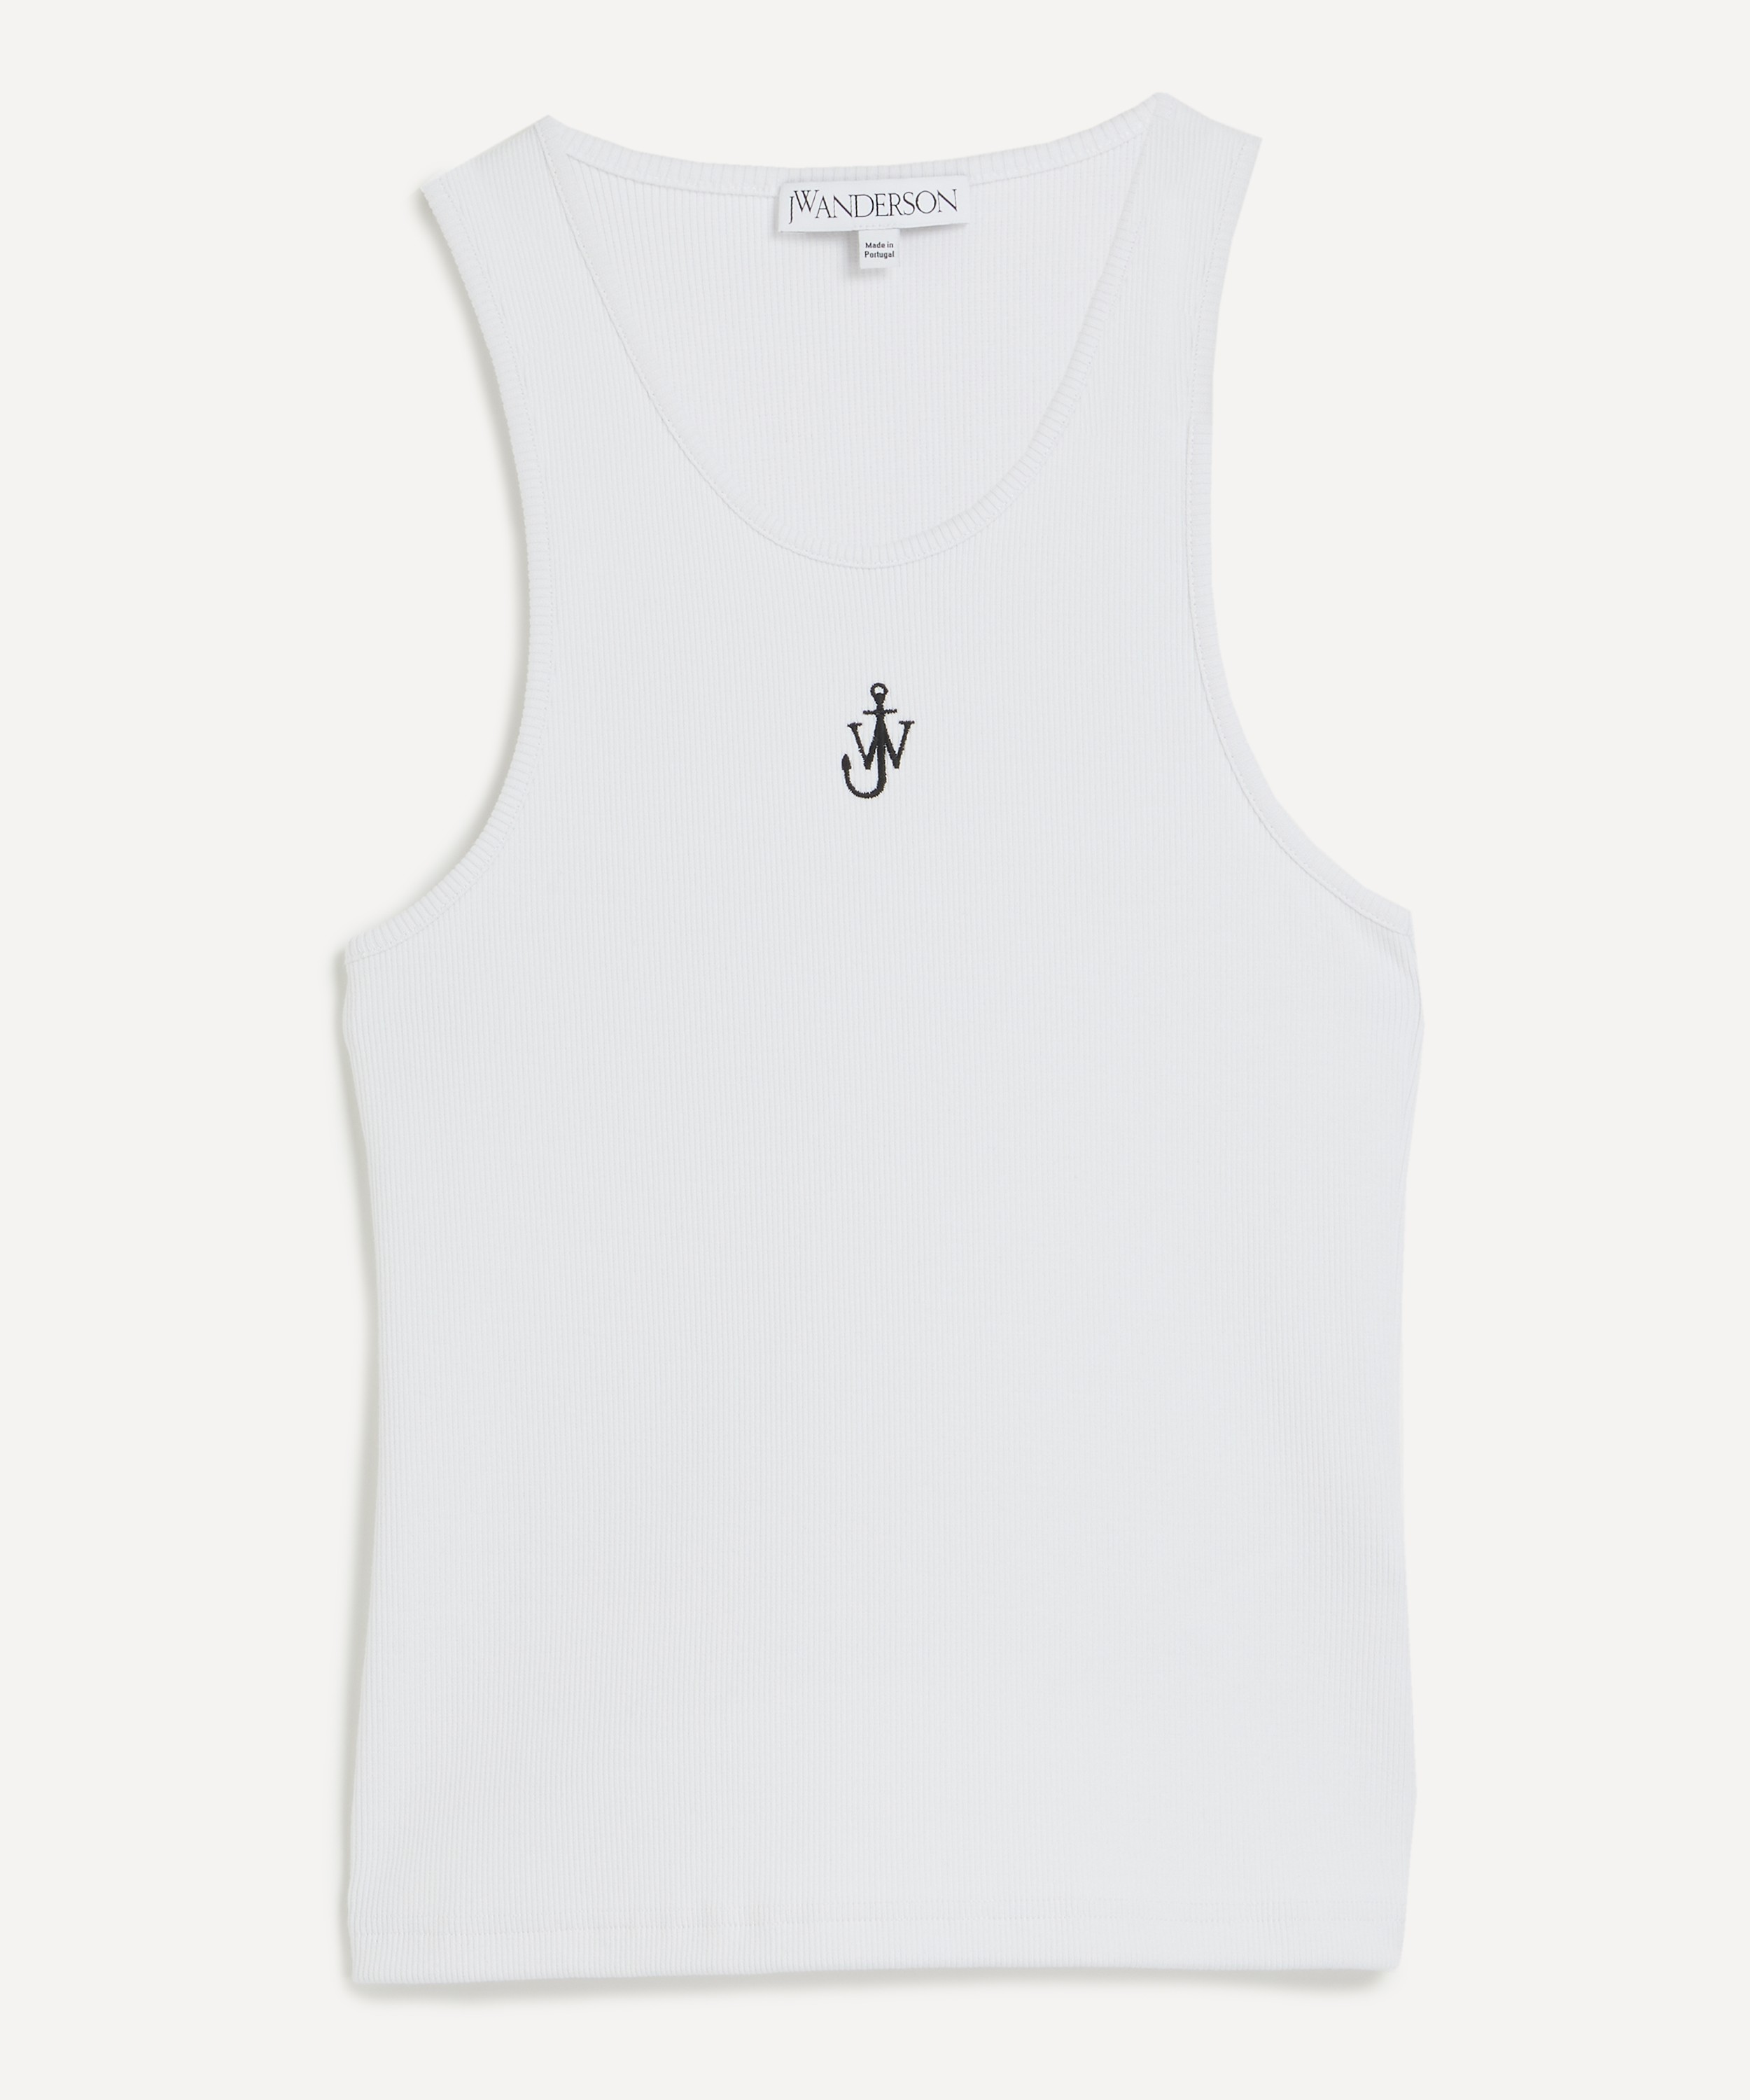 JW Anderson - Anchor Embroidery Tank Top